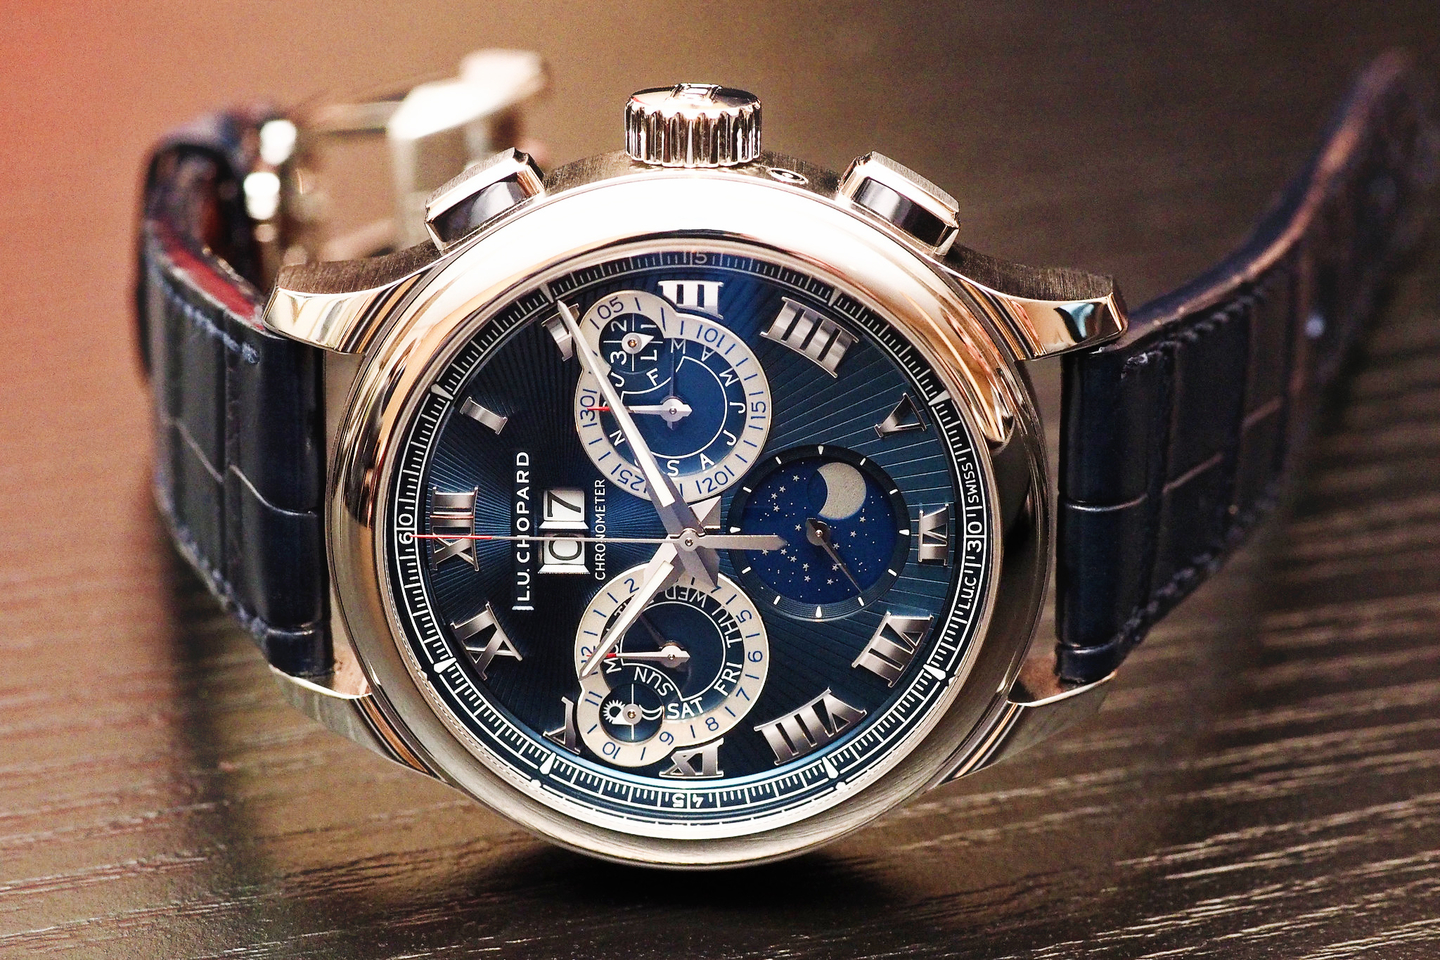 L.U.C. Lunar One and Perpetual Chrono Hands-On